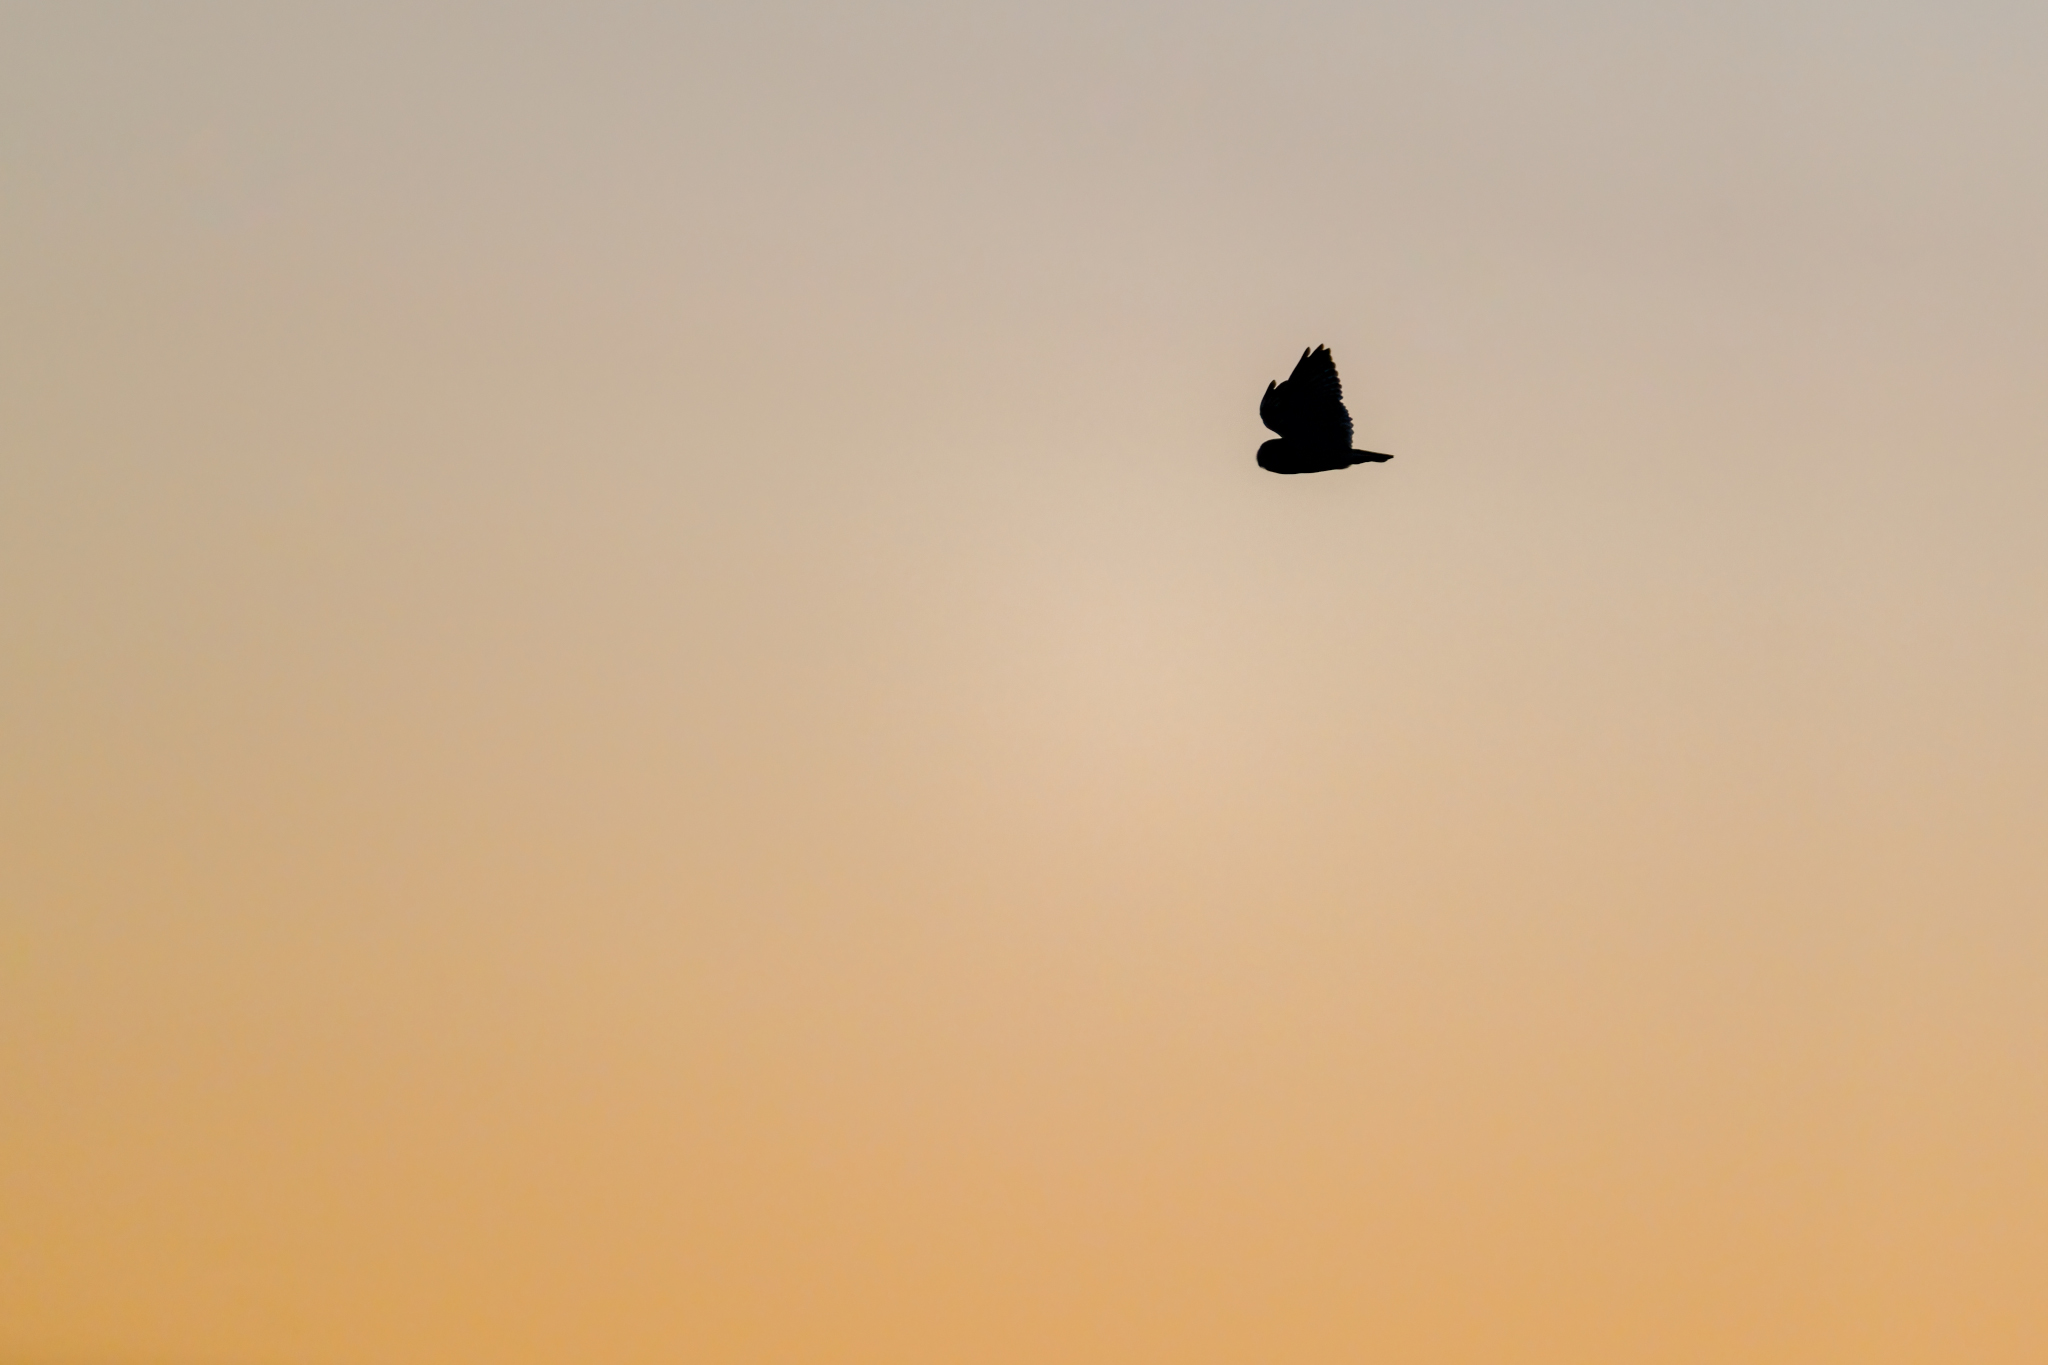 a small silhouette of a Short-eared Owl flying across an orange creamsicle colored sunset sky.